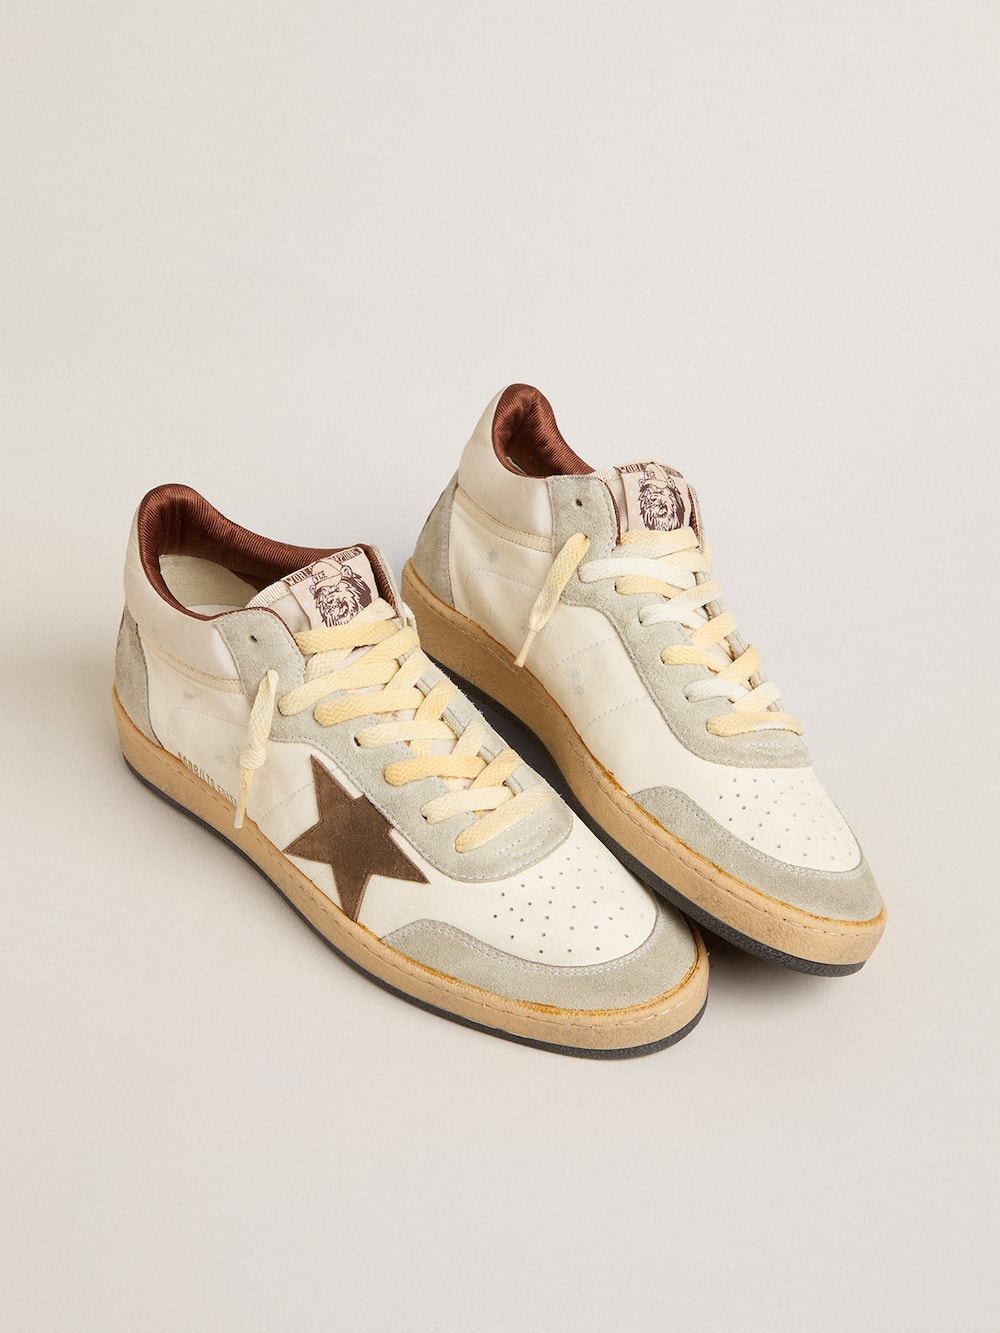 Golden Goose - Ball Star LTD in nappa and nylon with suede star and inserts in 